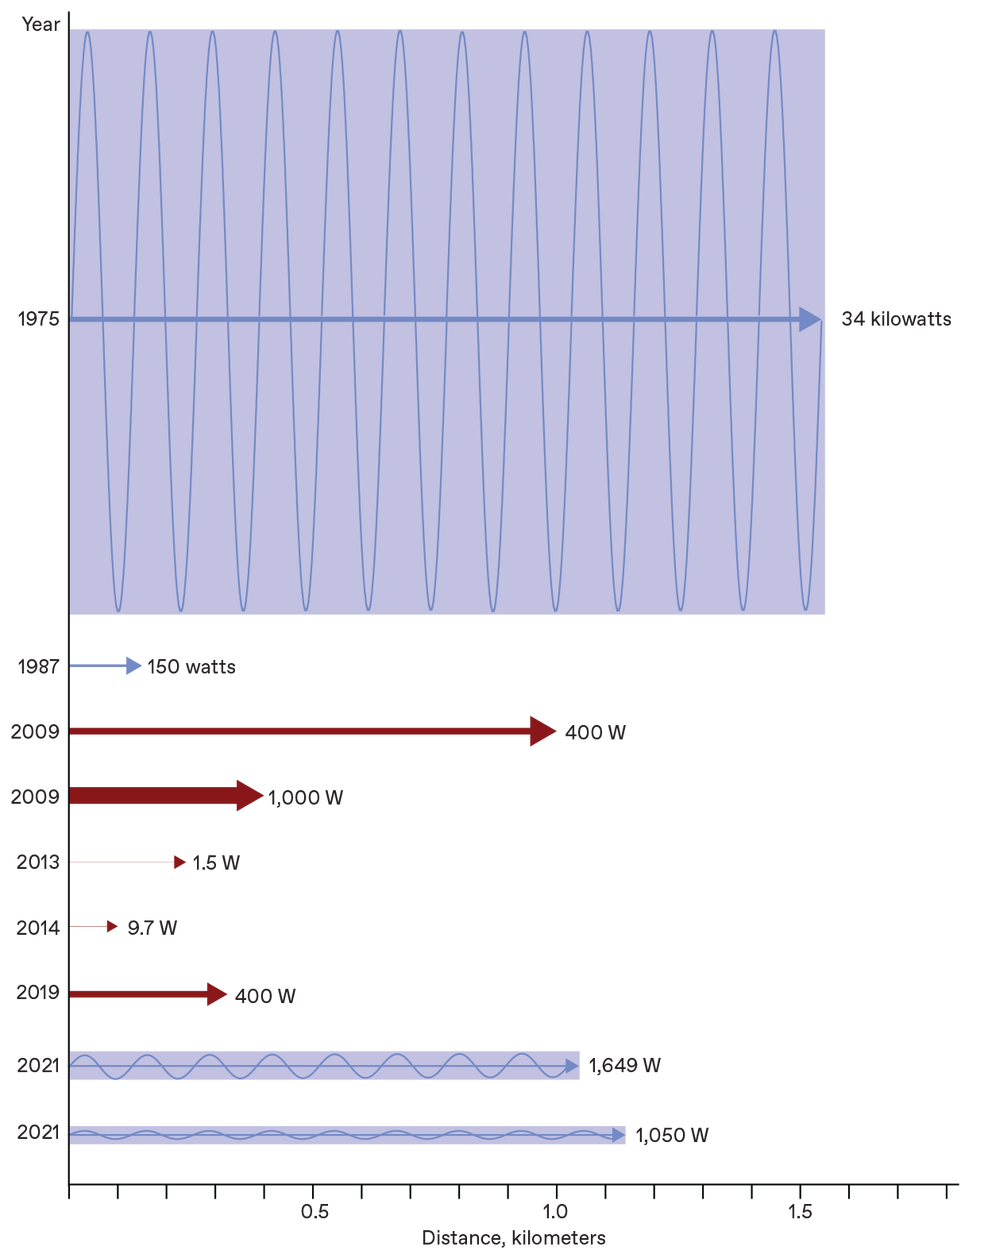 This diagram shows the peak power levels and distance achieved in 11 power-beaming demonstrations carried out between 1975 and 2021